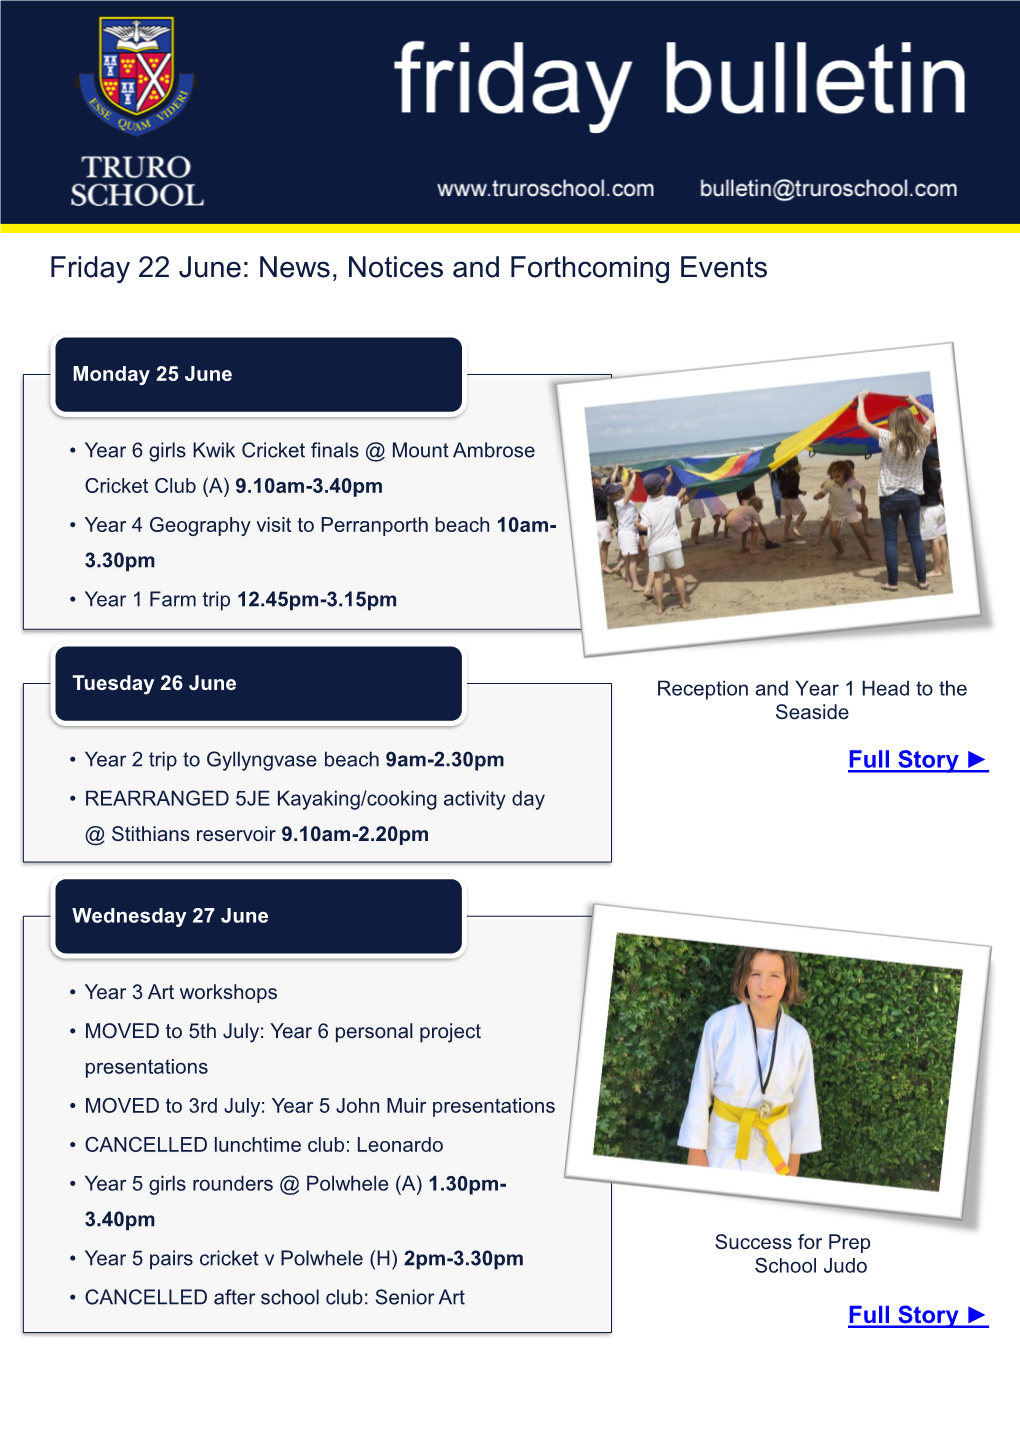 Friday 22 June: News, Notices and Forthcoming Events